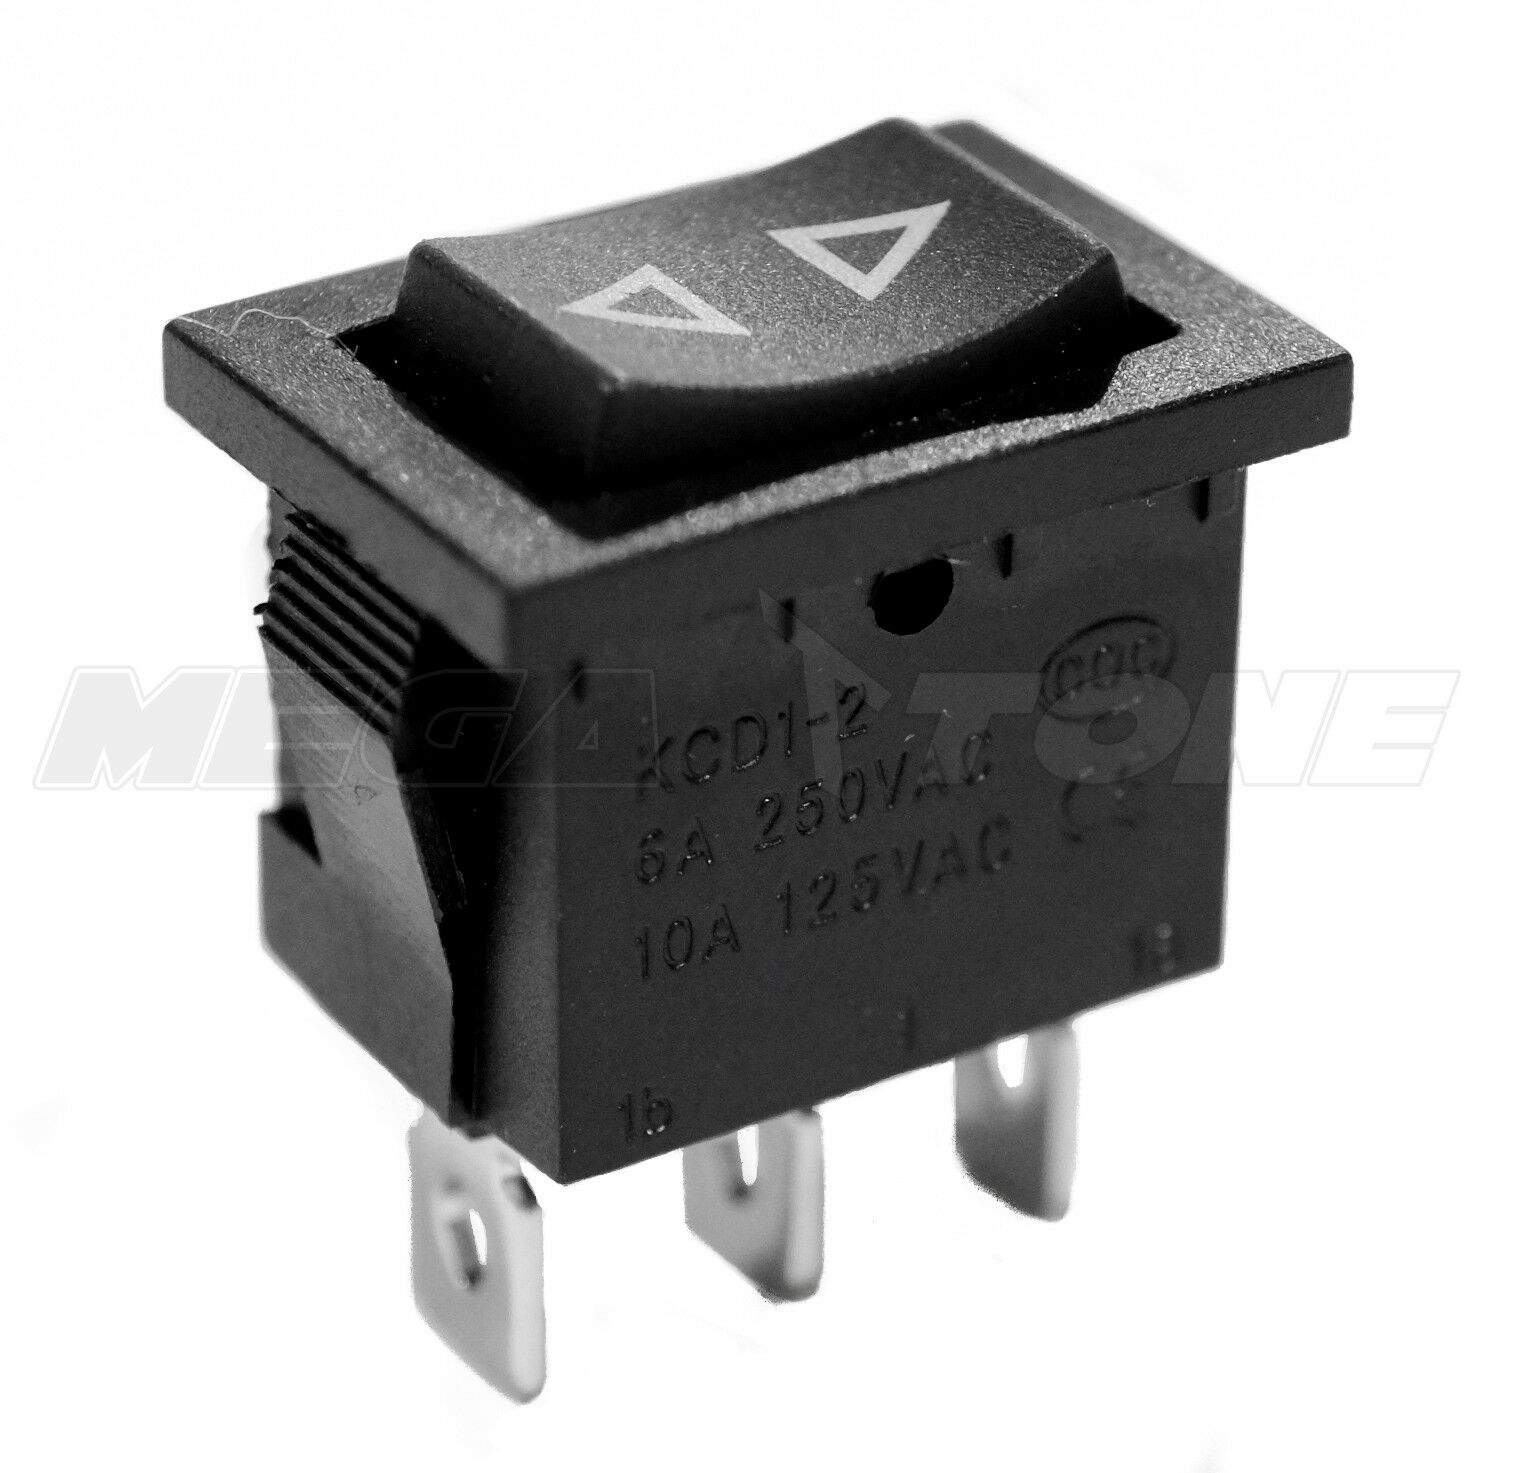 Spdt Kcd1 Mini Rocker Switch Momentary (on)-off-(on) 6a/250vac Usa Seller!!!